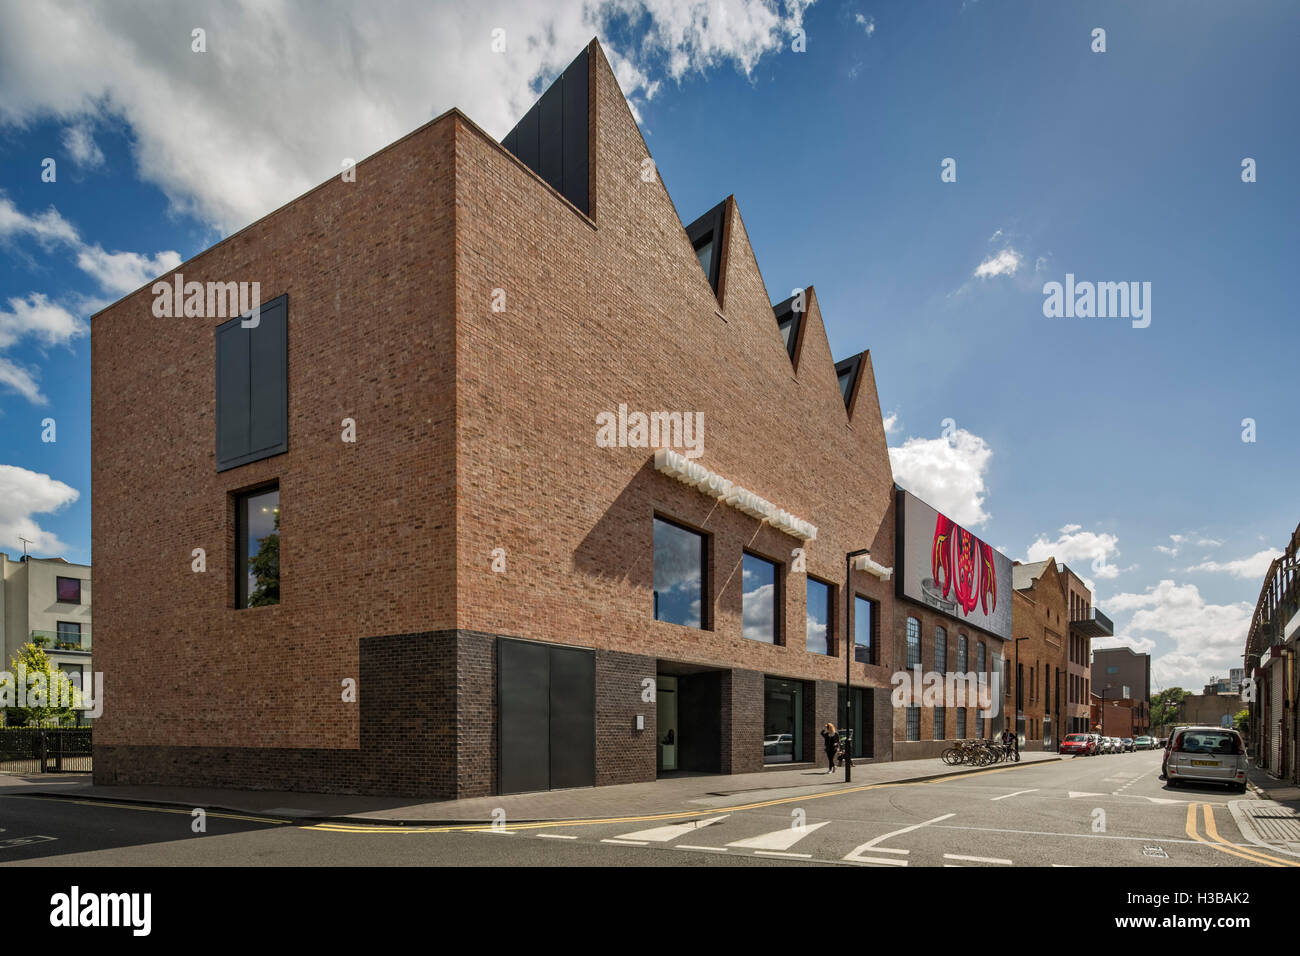 The Newport Street Gallery in Vauxhall designed by architects Caruso St  John. Newport Street Gallery, Vauxhall, United Kingdom Stock Photo - Alamy